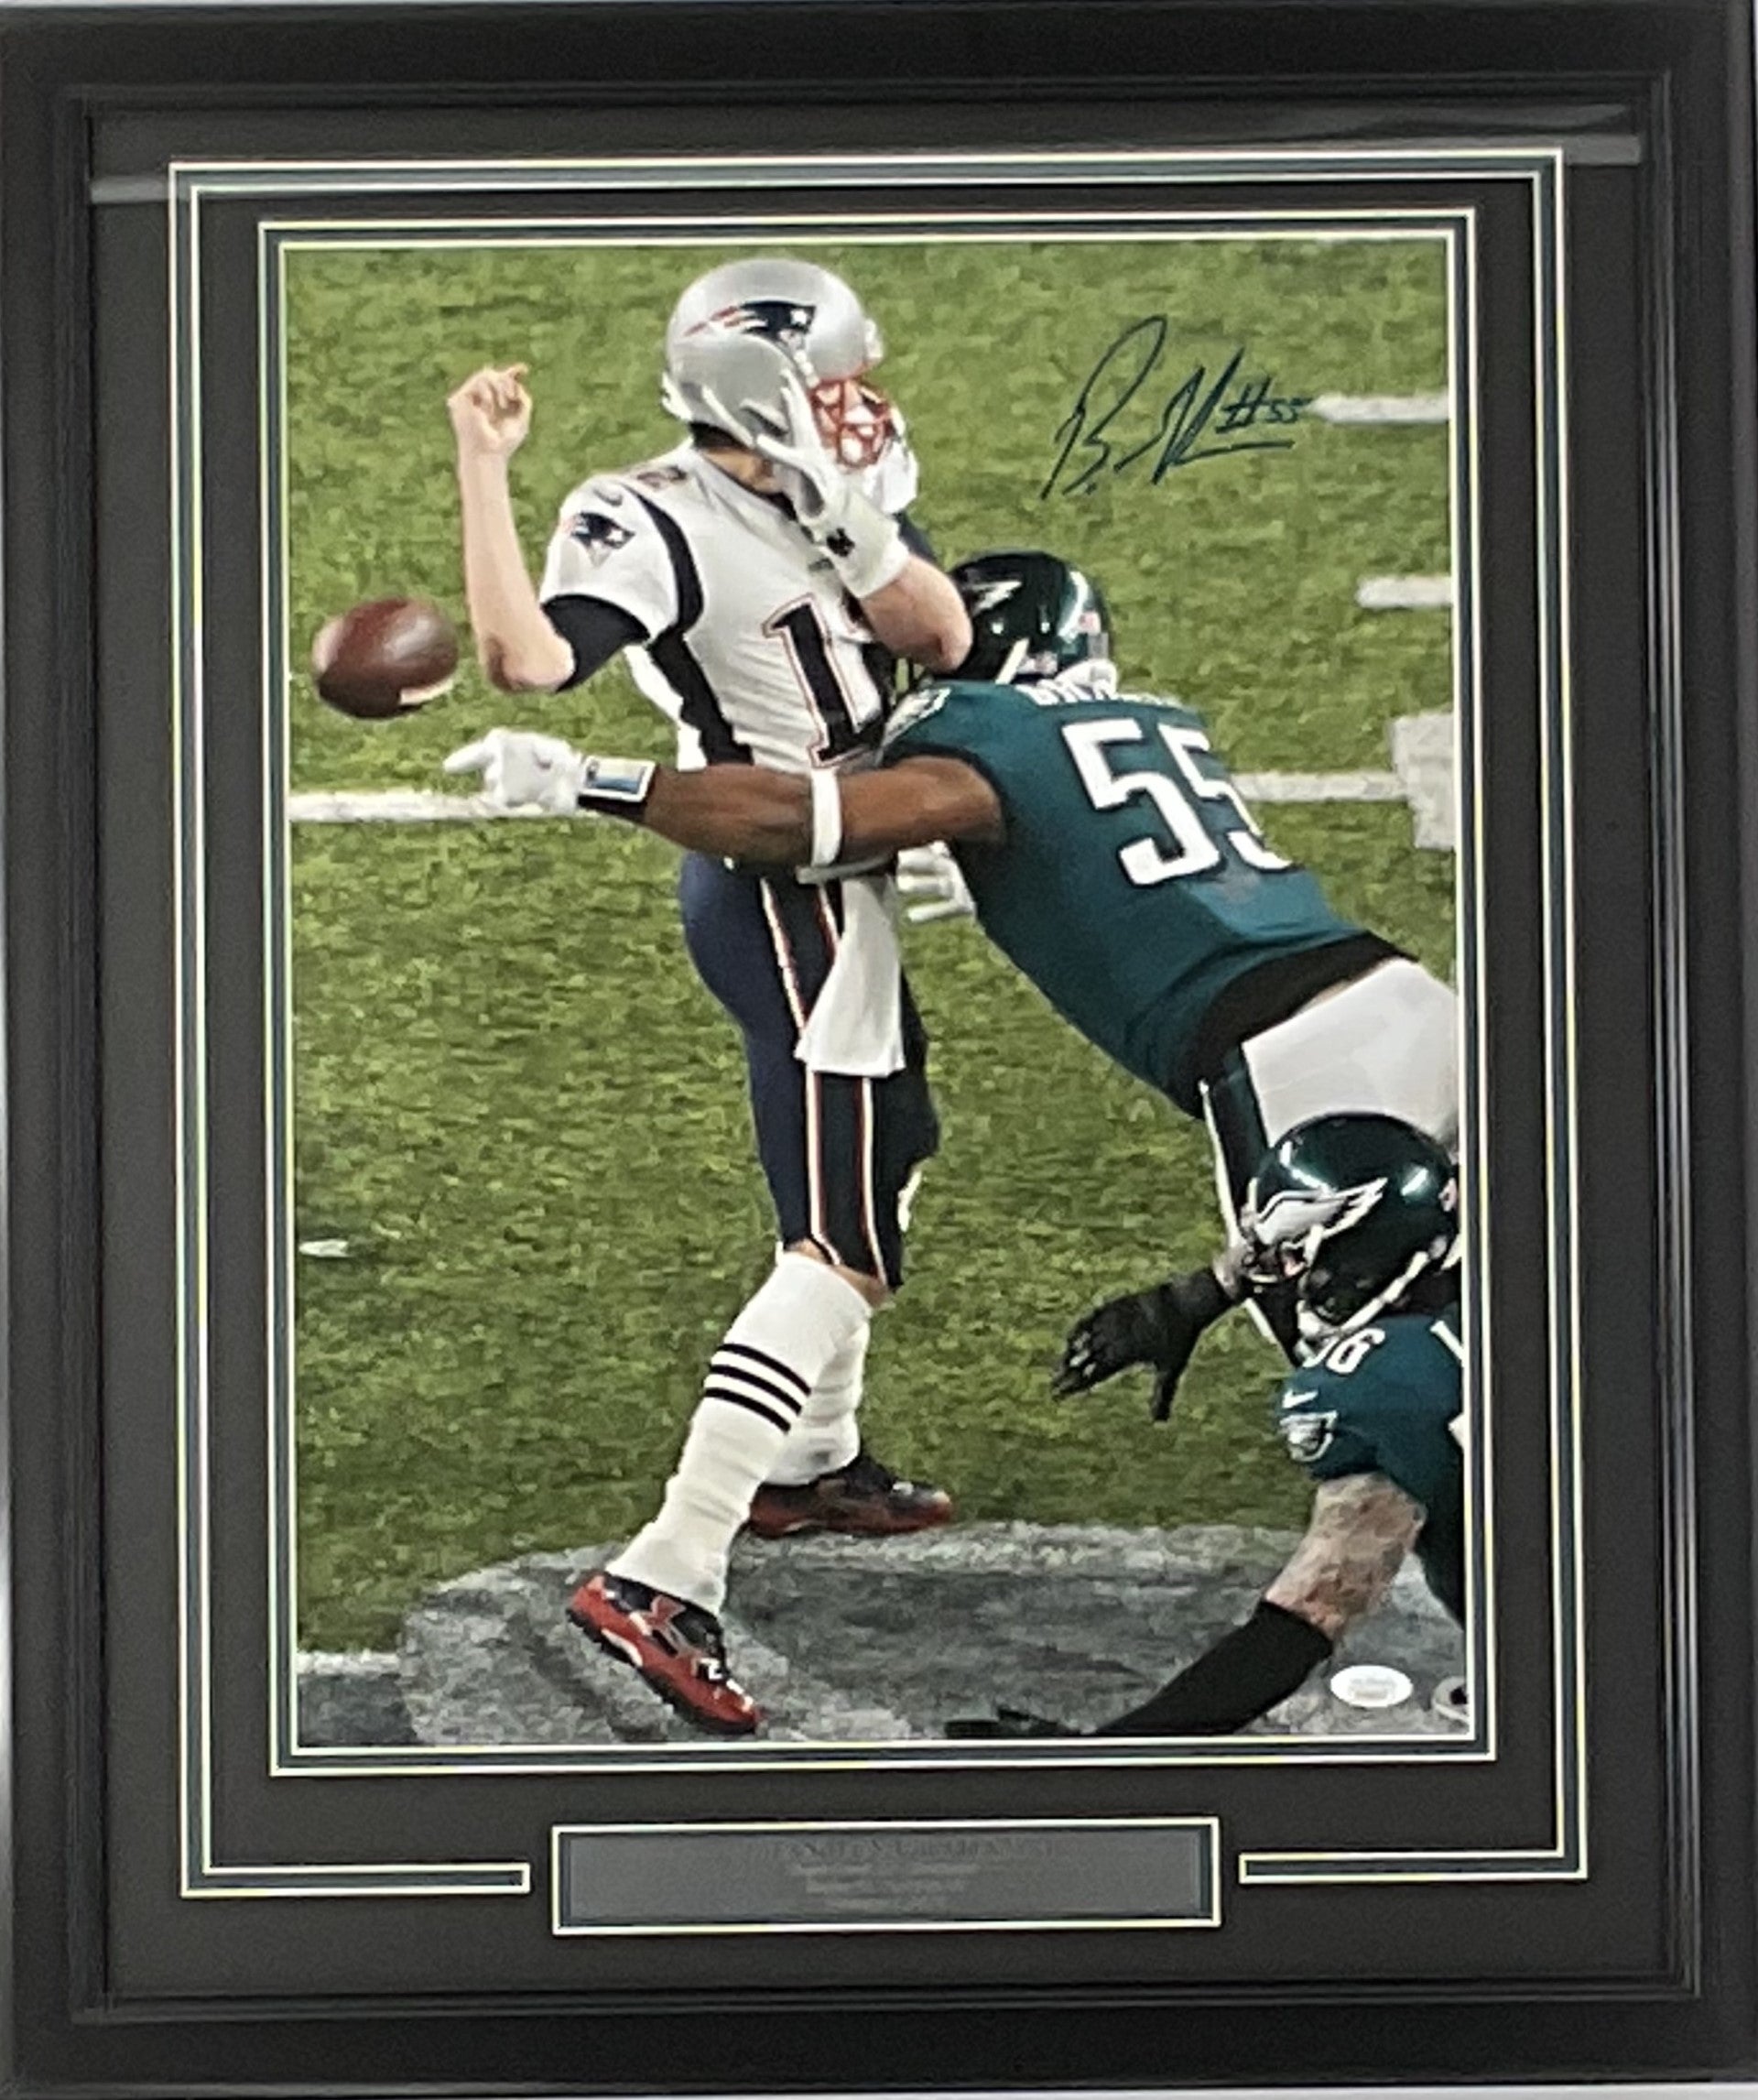 Framing a Signed Carson Wentz Jersey From the Philadelphia Eagles